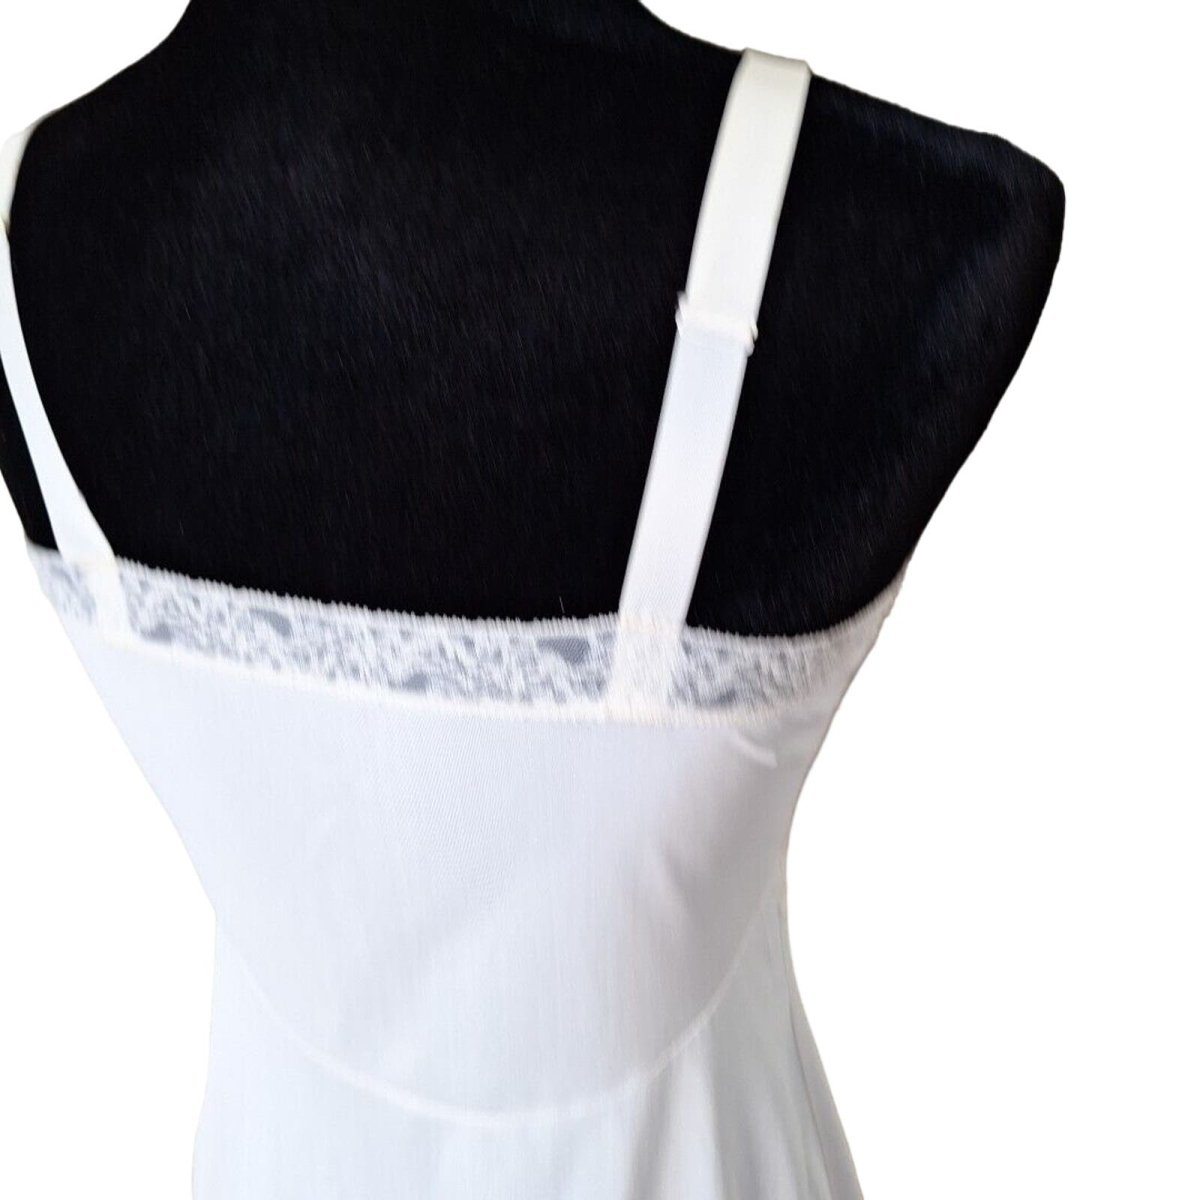 Vintage 50s/60s Off-White Slip w/ Sheer Lace Bodice and Hem Women Size 34 AS IS - themallvintage The Mall Vintage